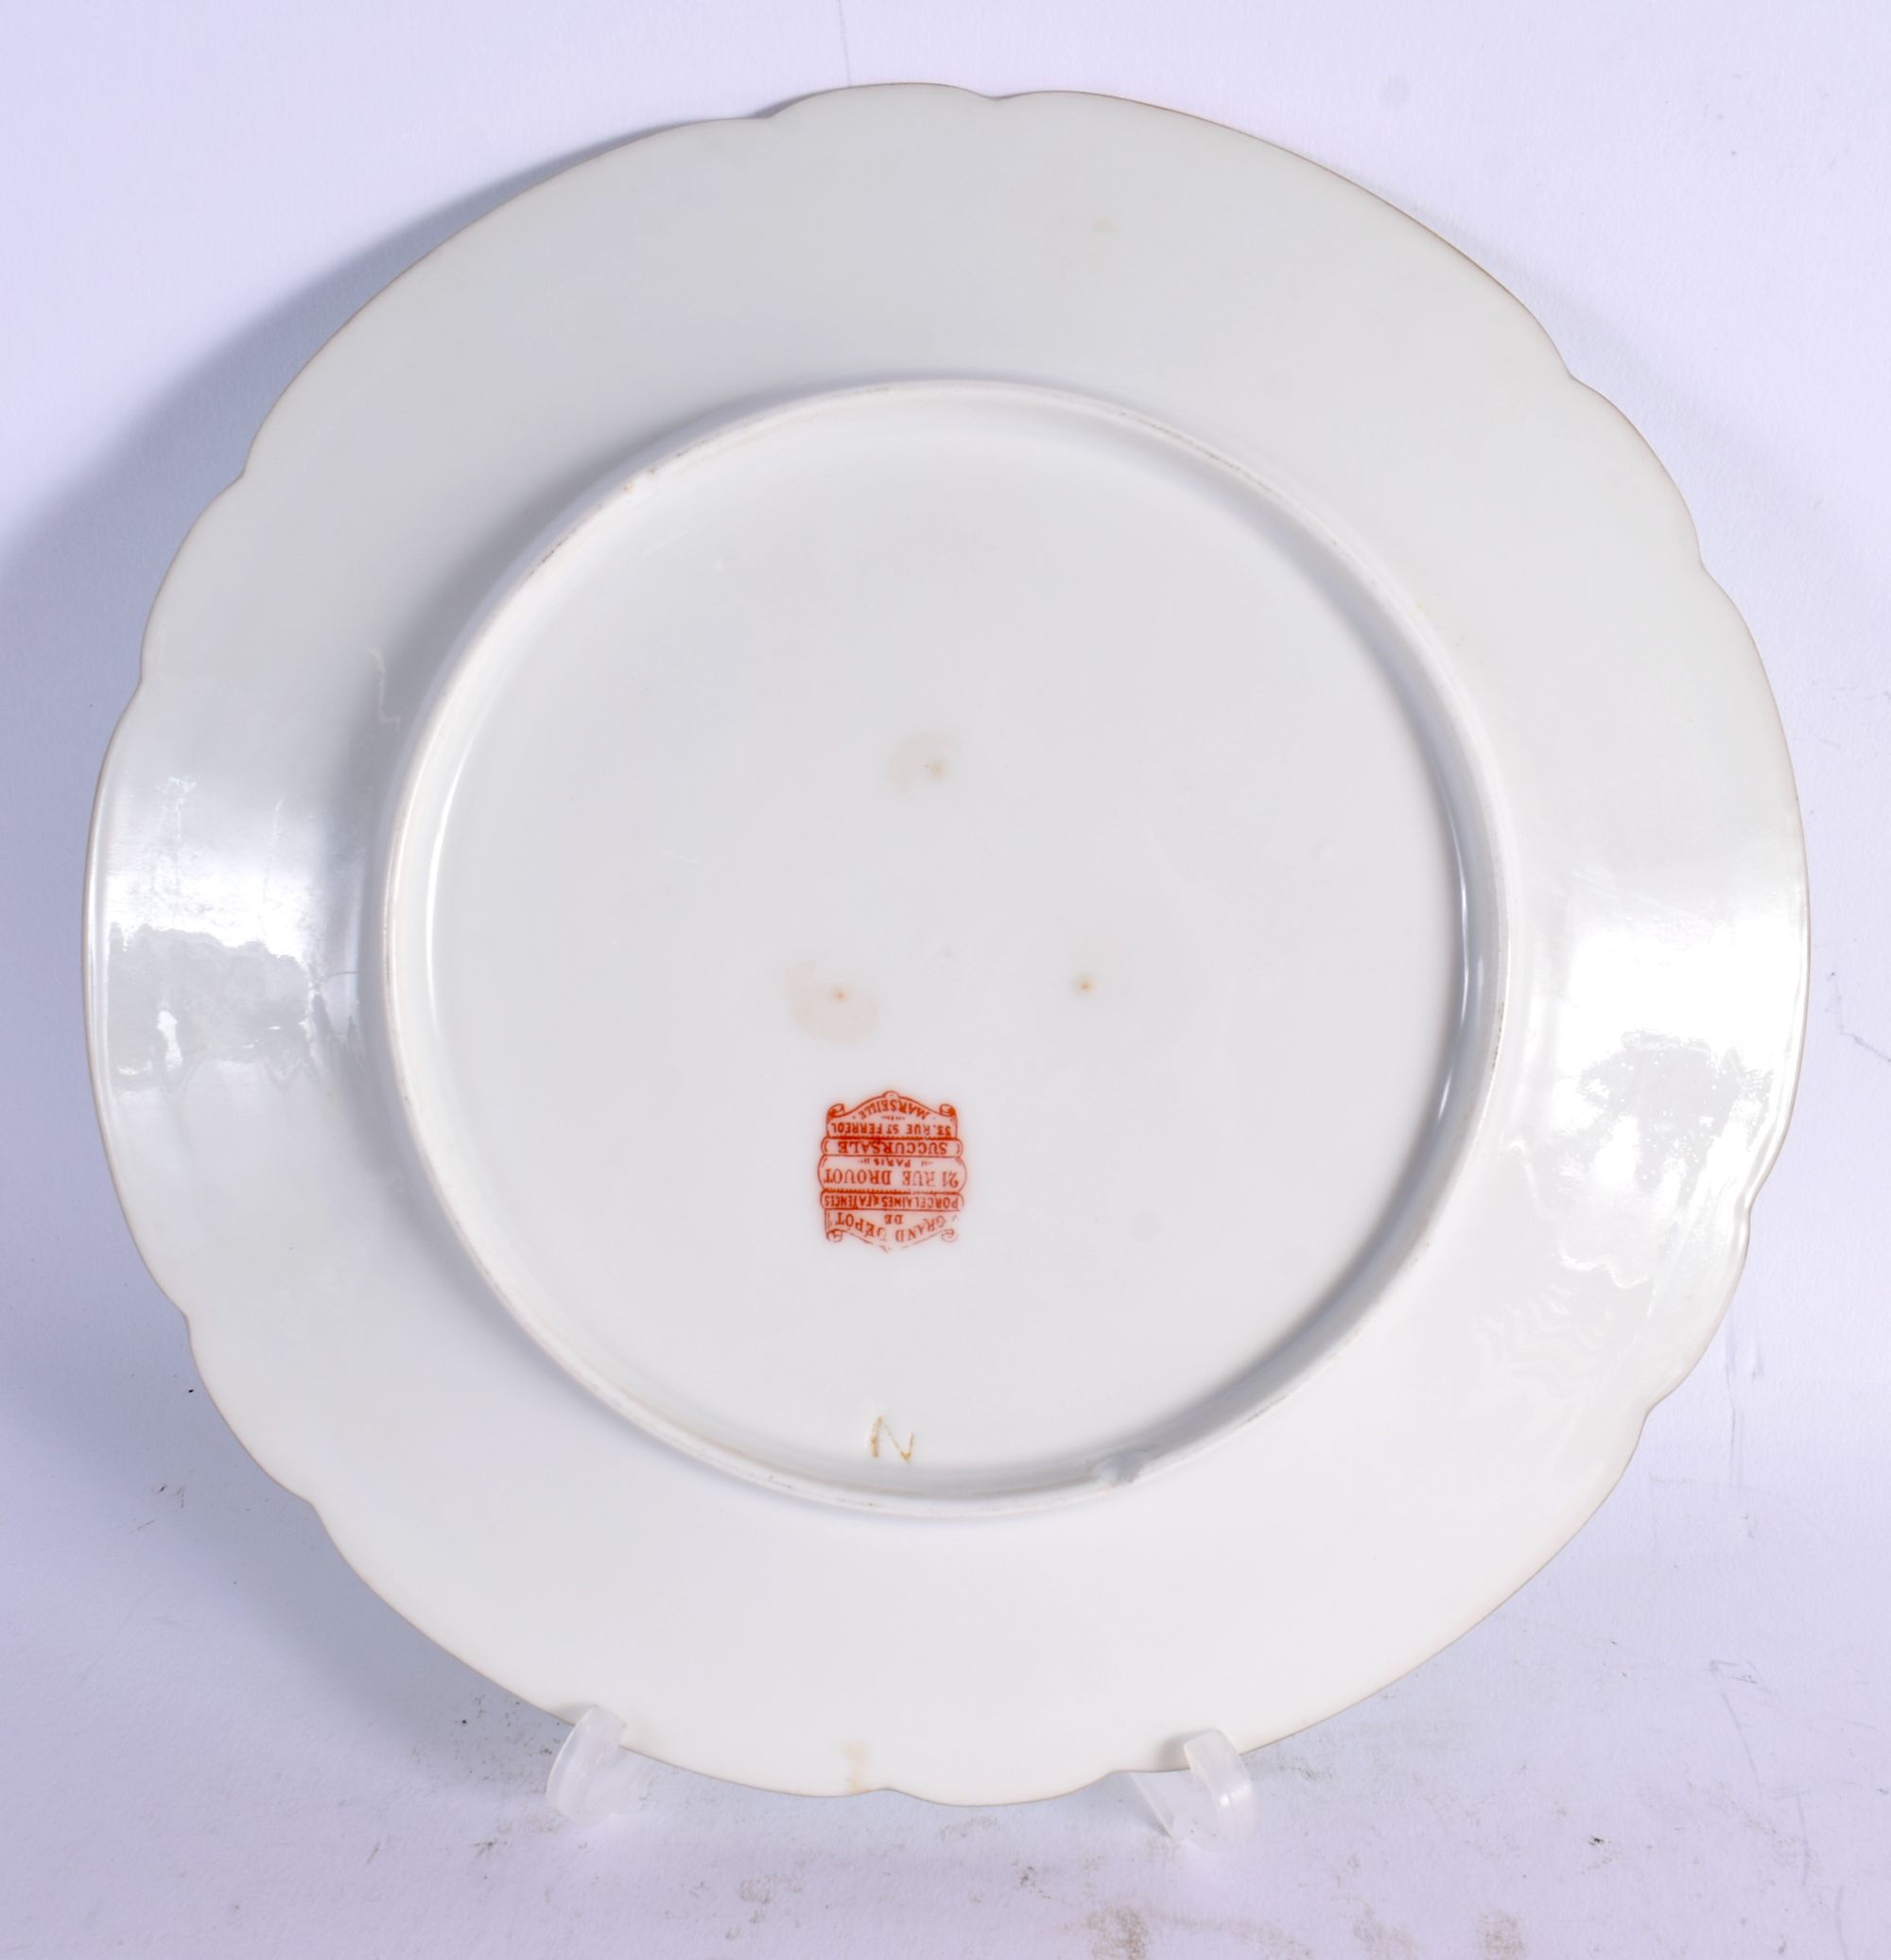 A LARGE AND EXTENSIVE LATE 19TH CENTURY FRENCH PORCELAIN DINNER SERVICE painted with a monogram. Lar - Image 9 of 14